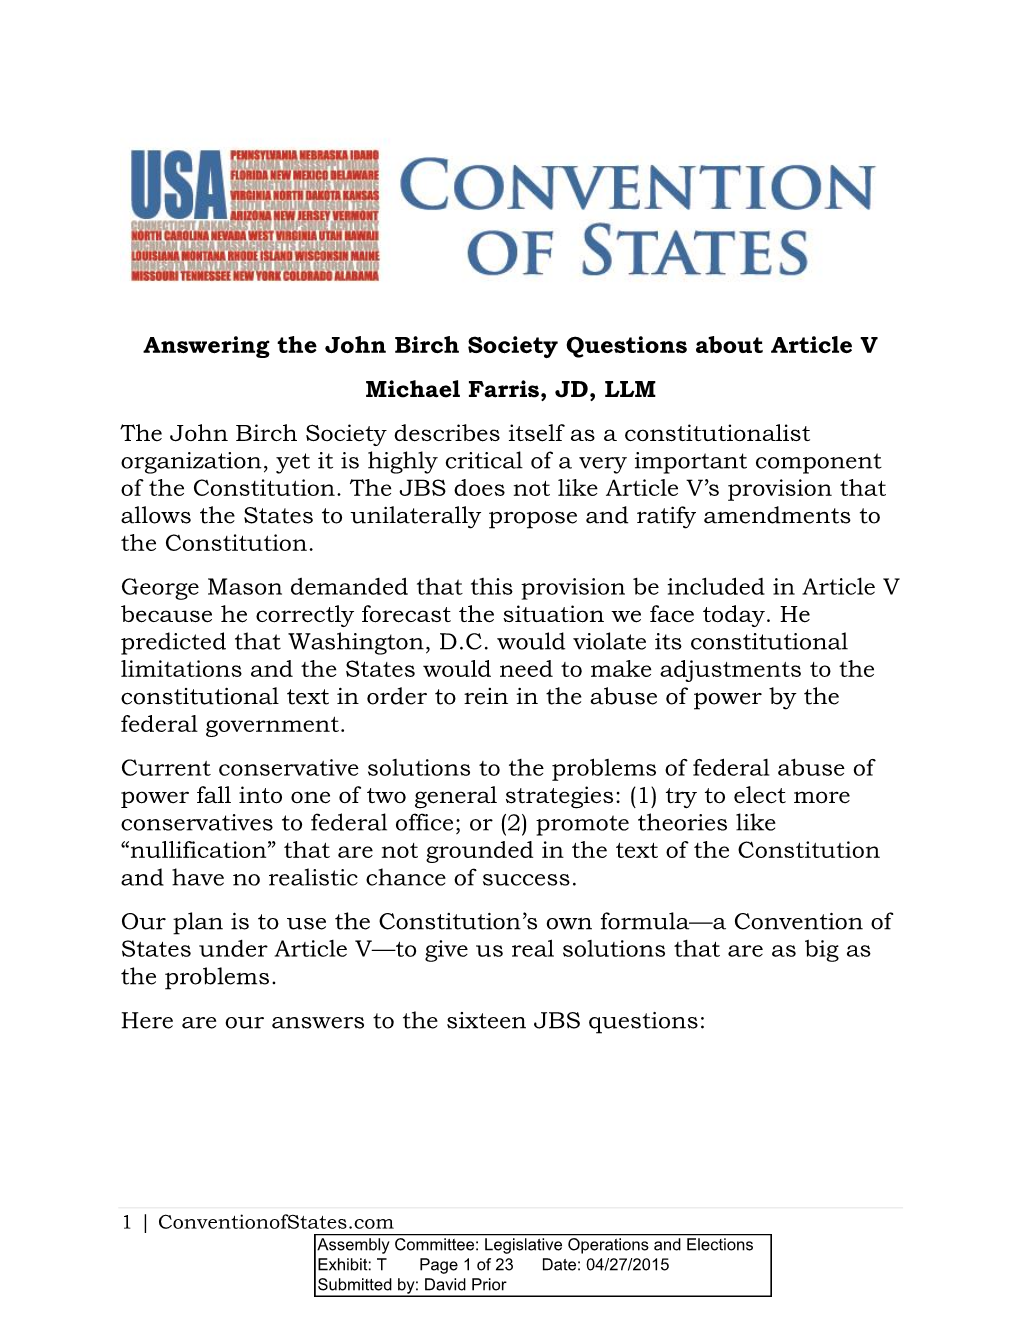 Answering the John Birch Society Questions About Article V